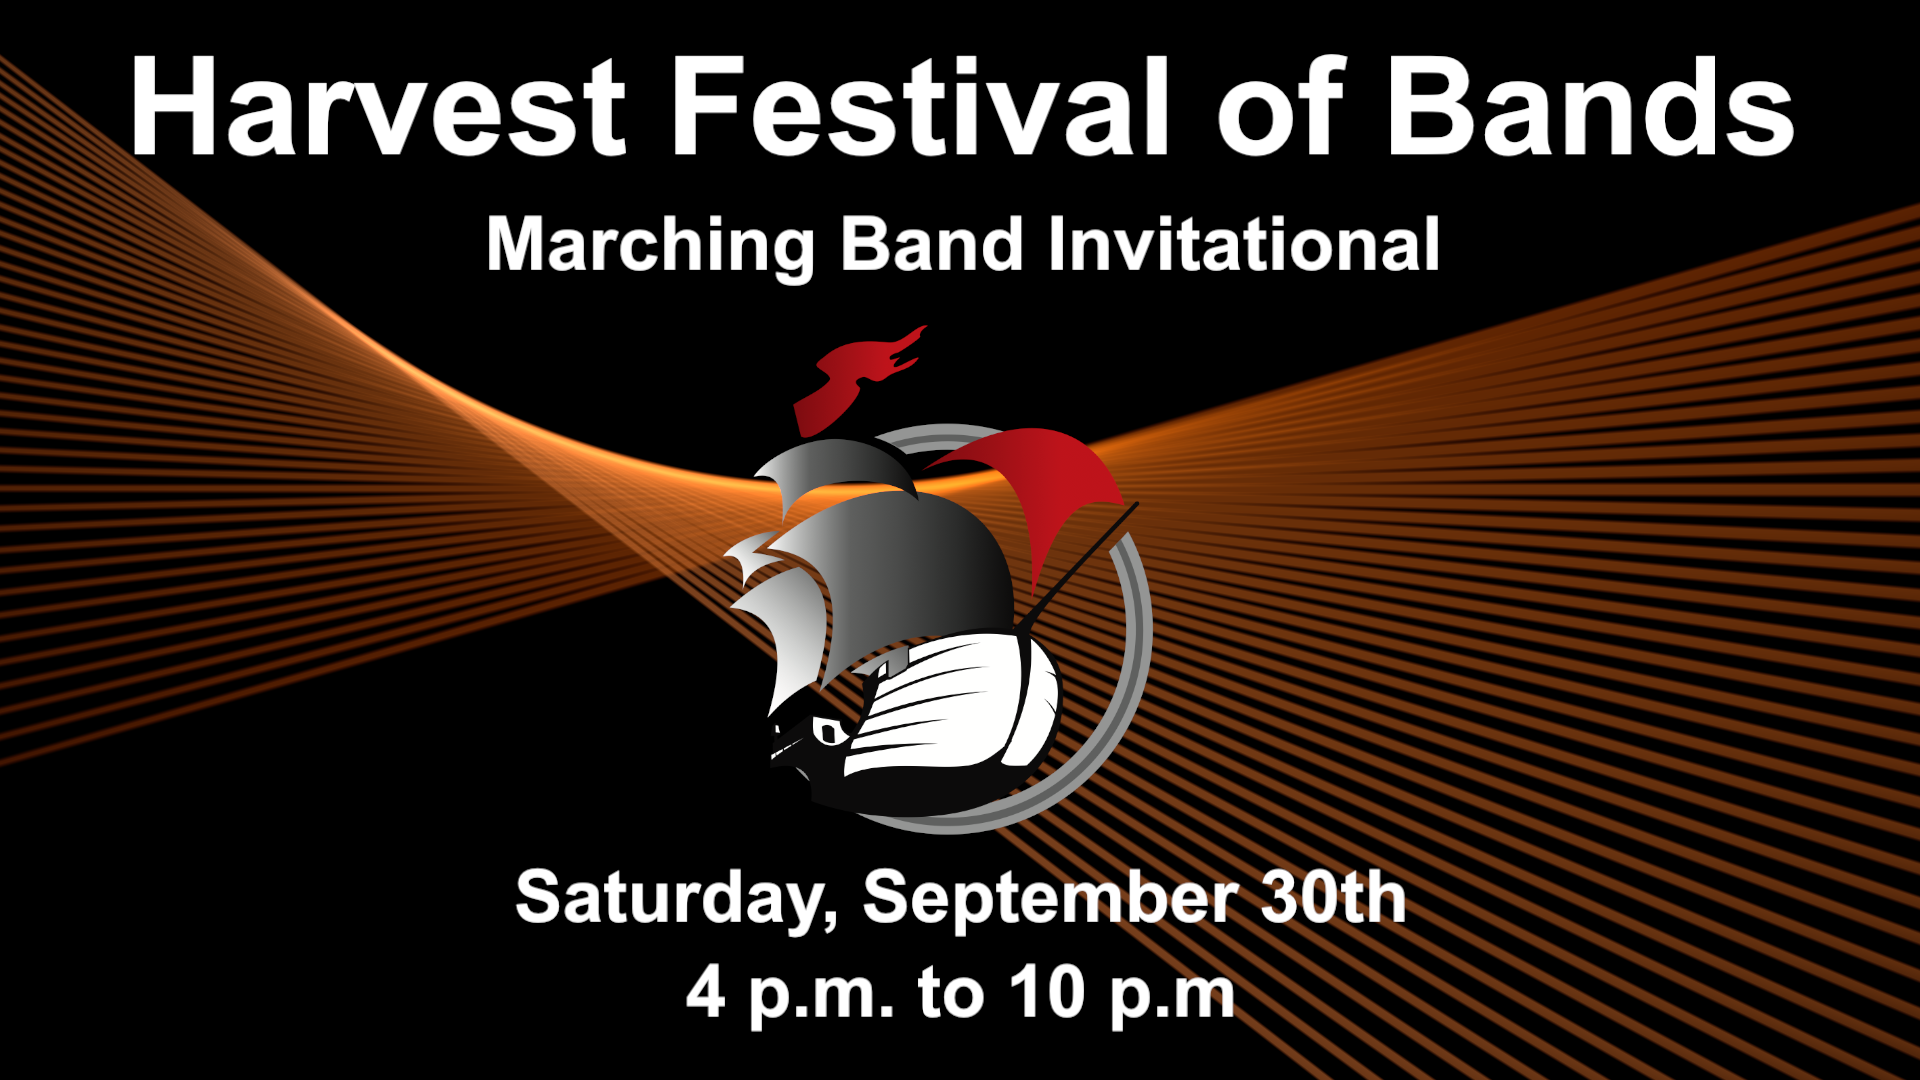 Harvest Festival of Bands at Plymouth High School on 09/30/2017